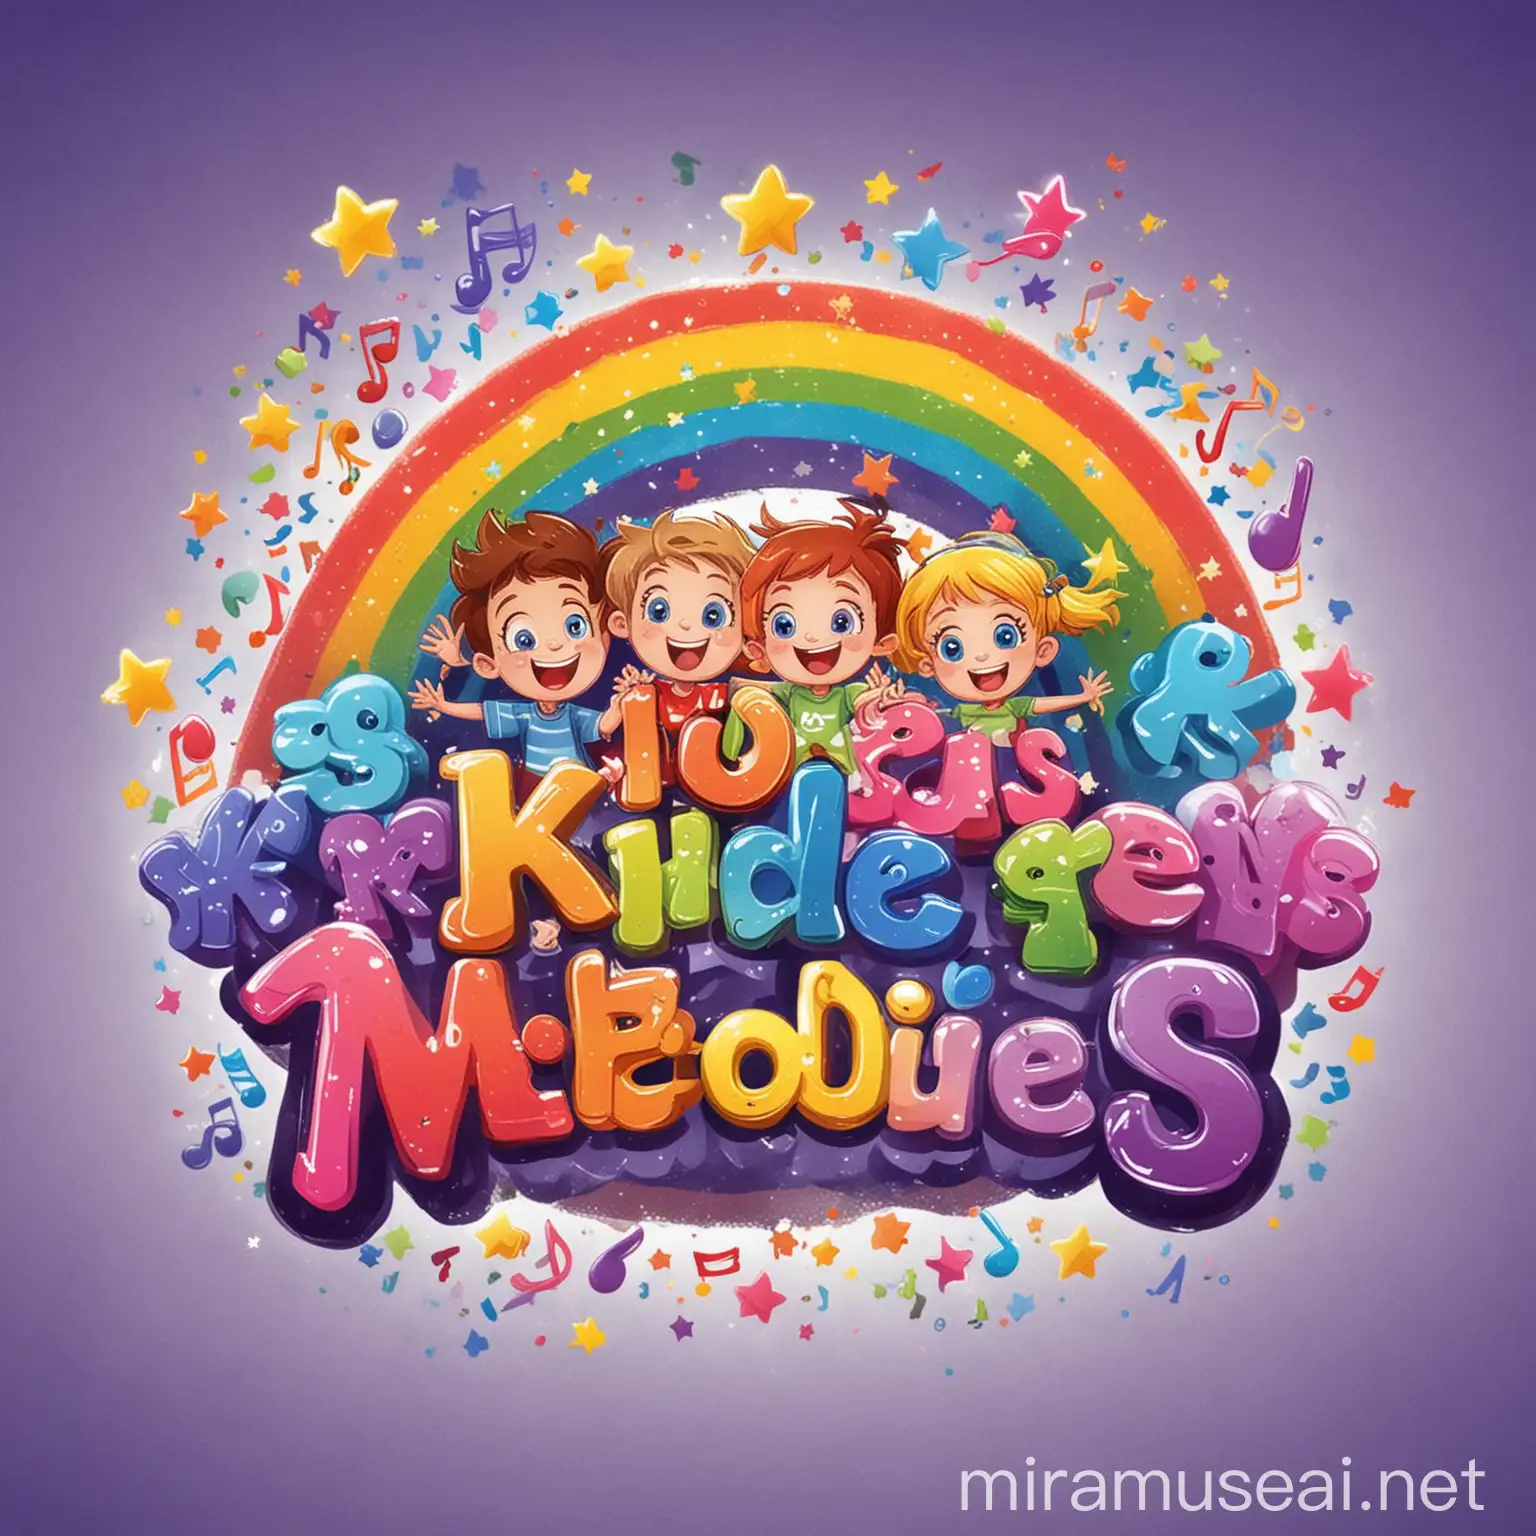 Design a logo for "Kidz Melodies": Combine colorful musical notes with playful cartoon characters of kids singing and dancing. Use vibrant hues and whimsical elements like stars or rainbows. Choose a fun font for the channel name. Ensure clarity and child-friendly appeal. for kids write the Kidz Melodies over the image or logo